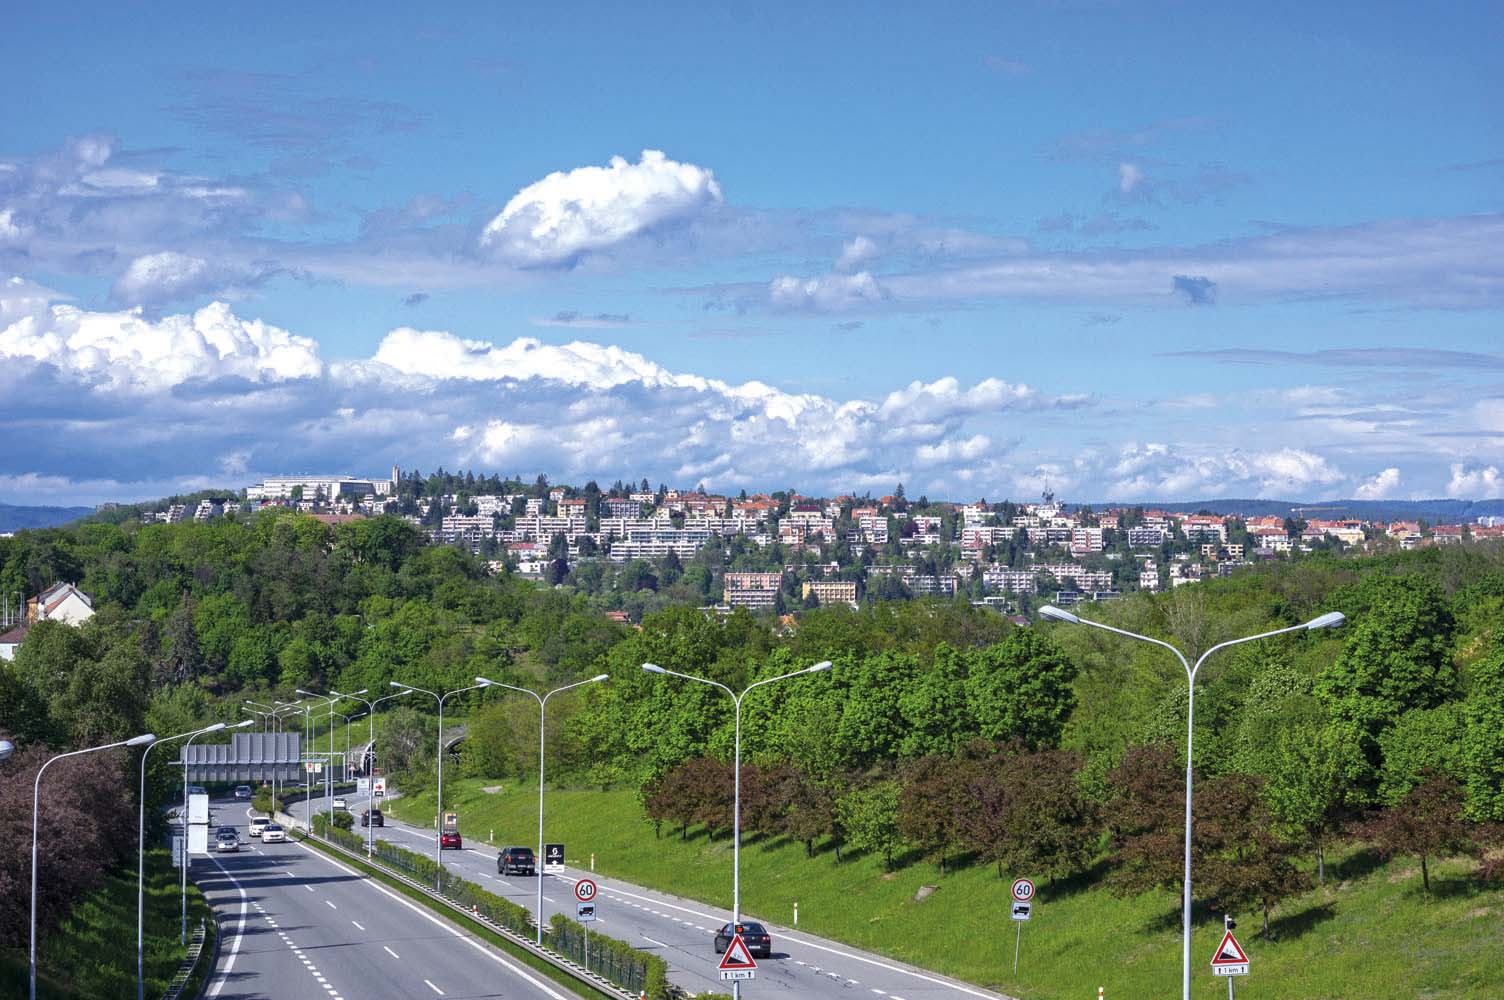 Brno cityscape with Pisarky tunnel and Zluty kopec (Yellow hill)